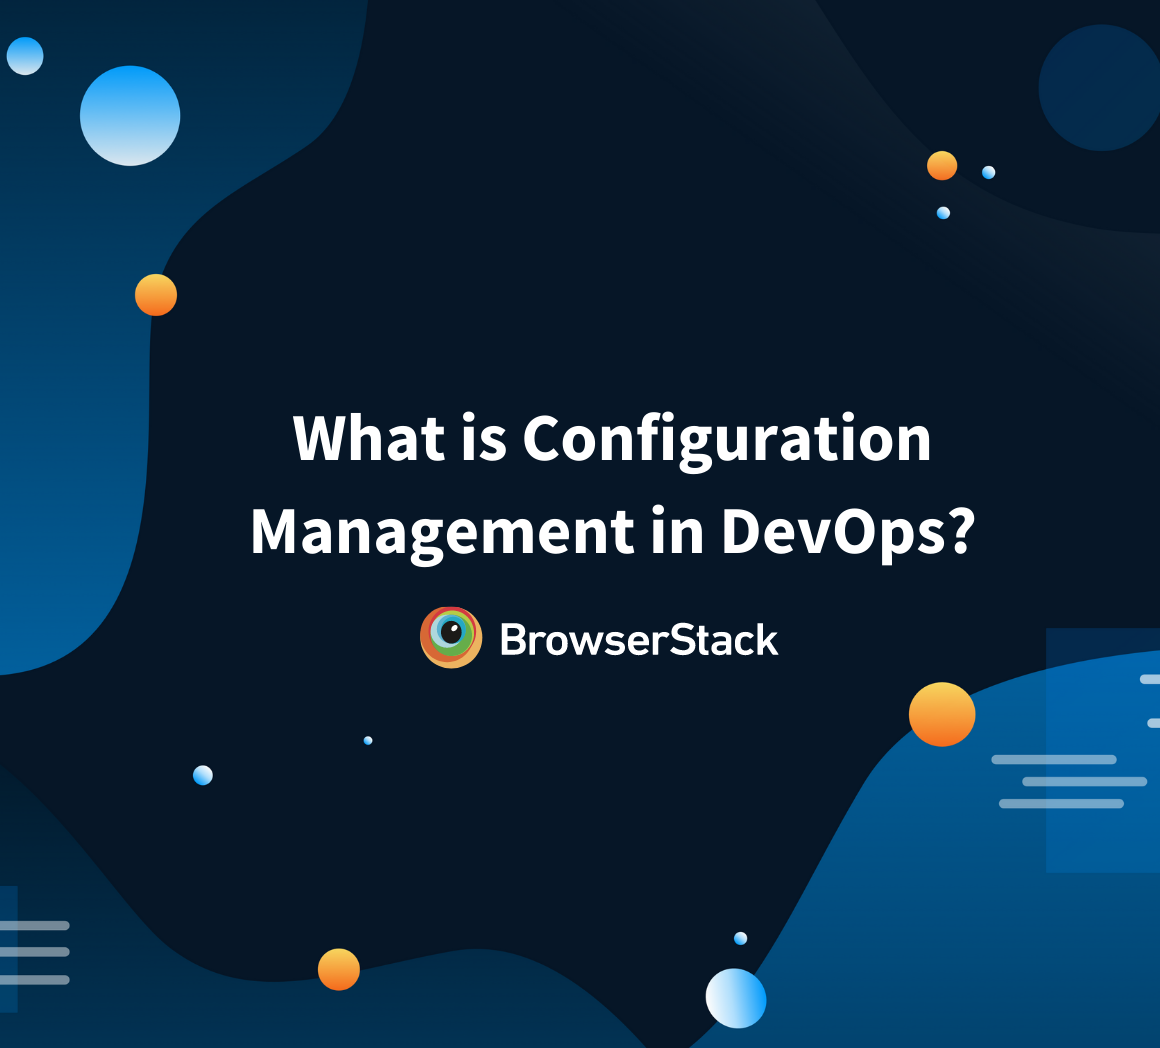 What is Configuration Management in DevOps?